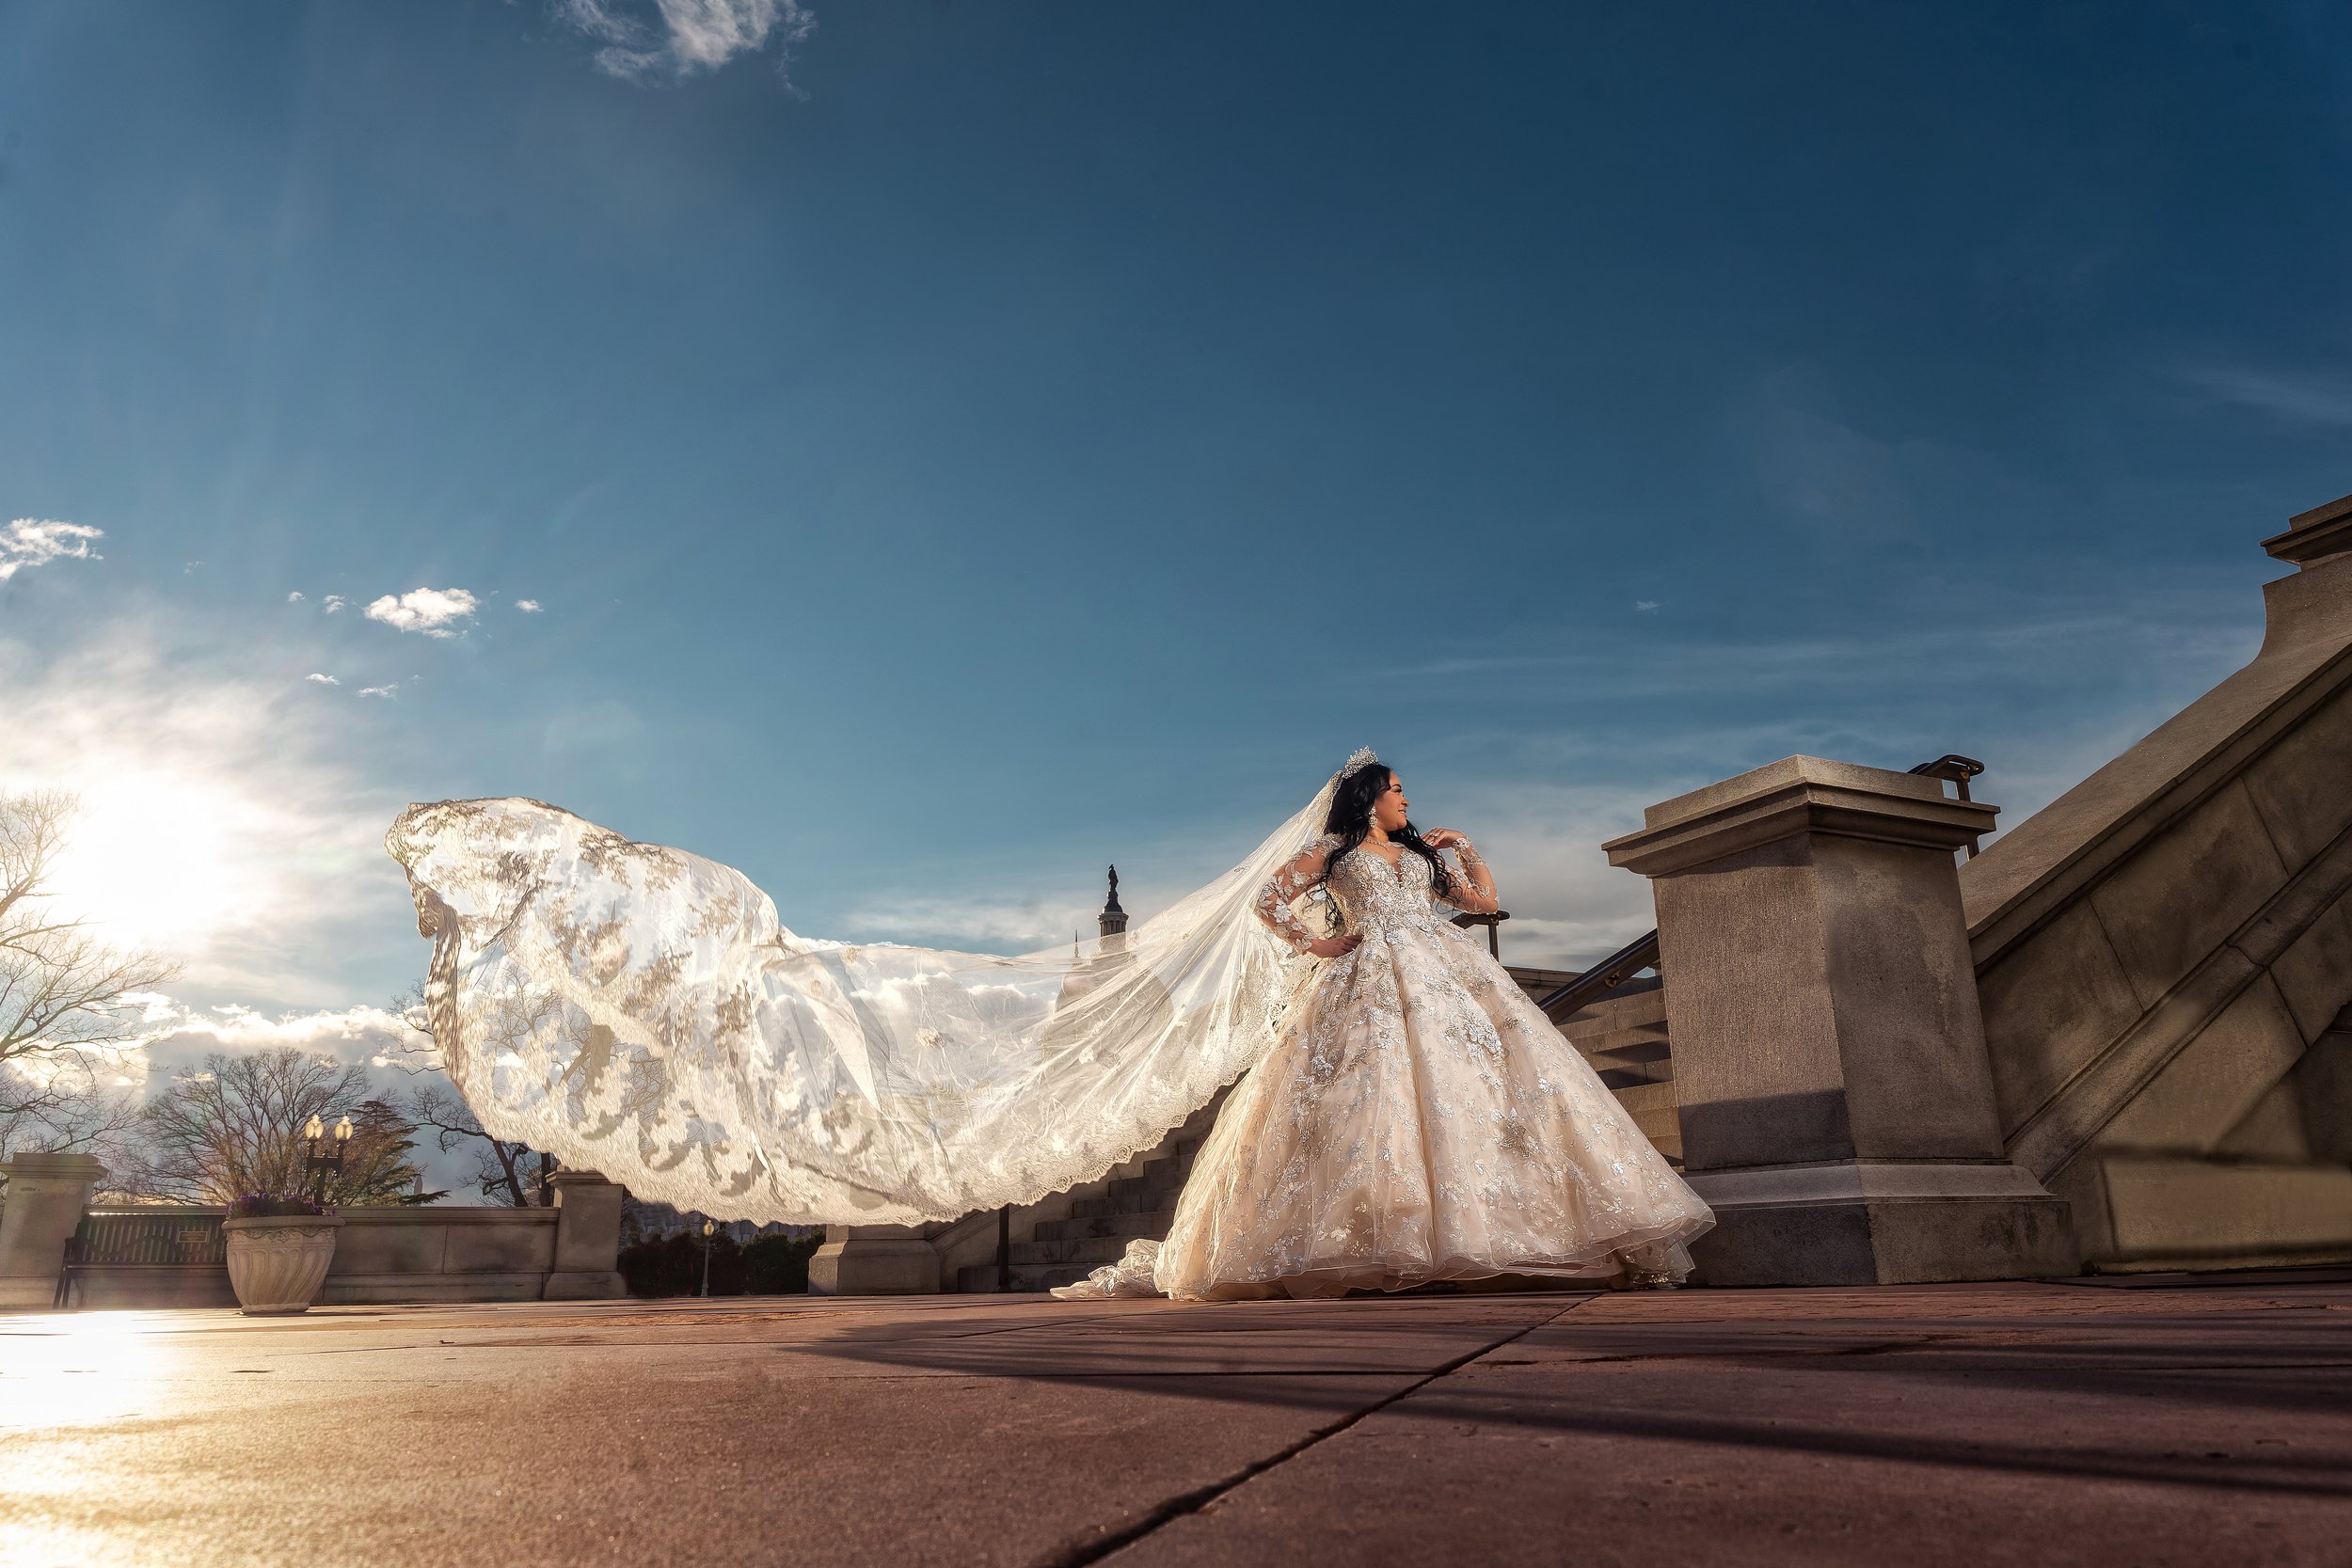 Bride and Groom at Library of Congress